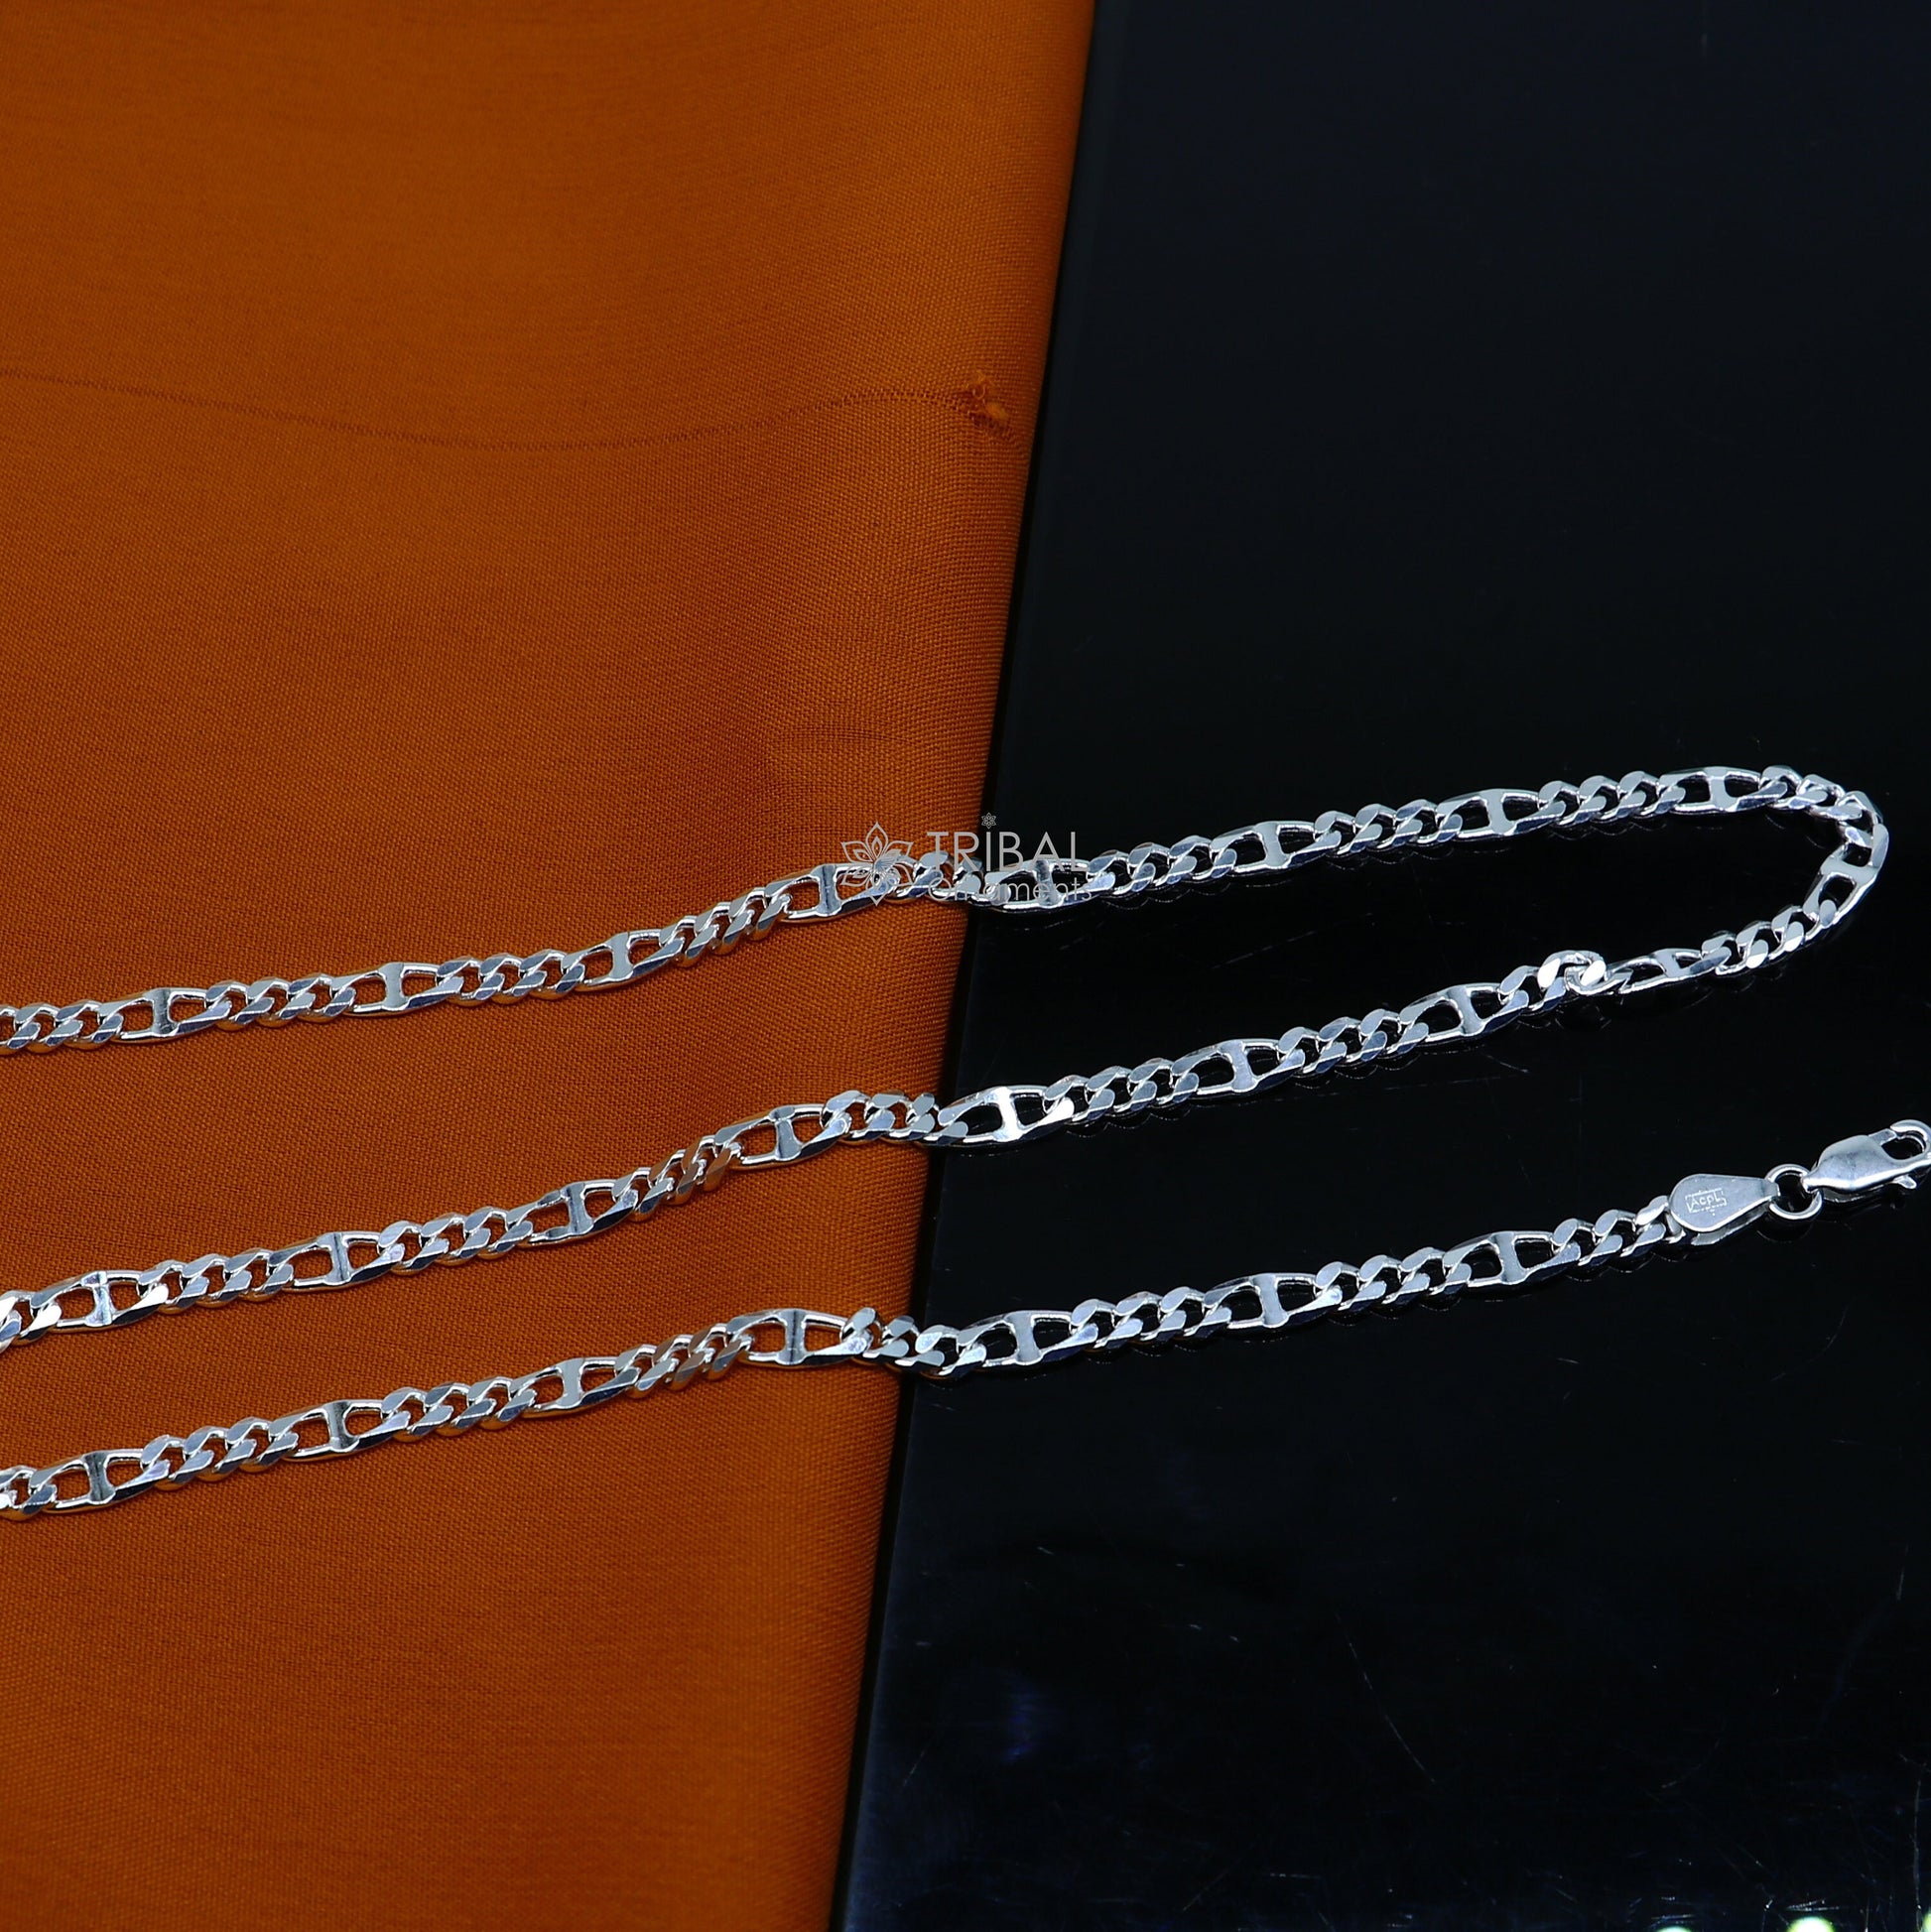 20" 4MM 925 sterling silver handmade solid fancy stylish silver chain necklace Nawabi chain best gifting jewelry from India ch244 - TRIBAL ORNAMENTS